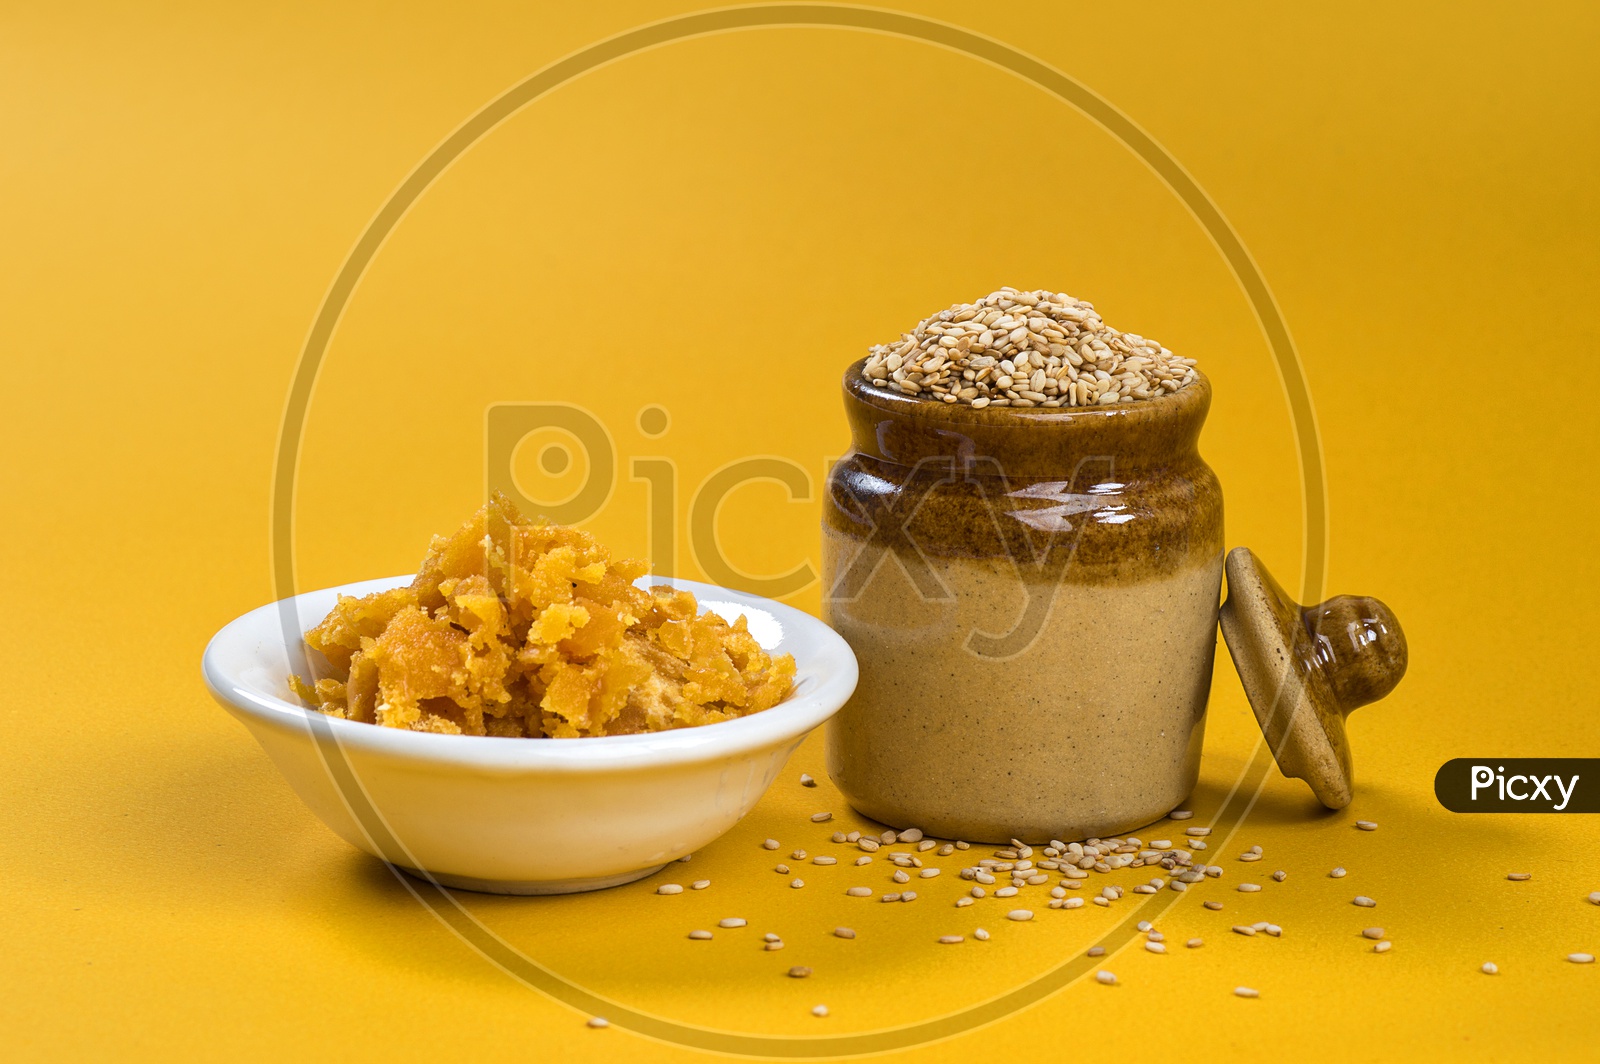 Sesame Seeds in clay pot with Jaggery in bowl on yellow background